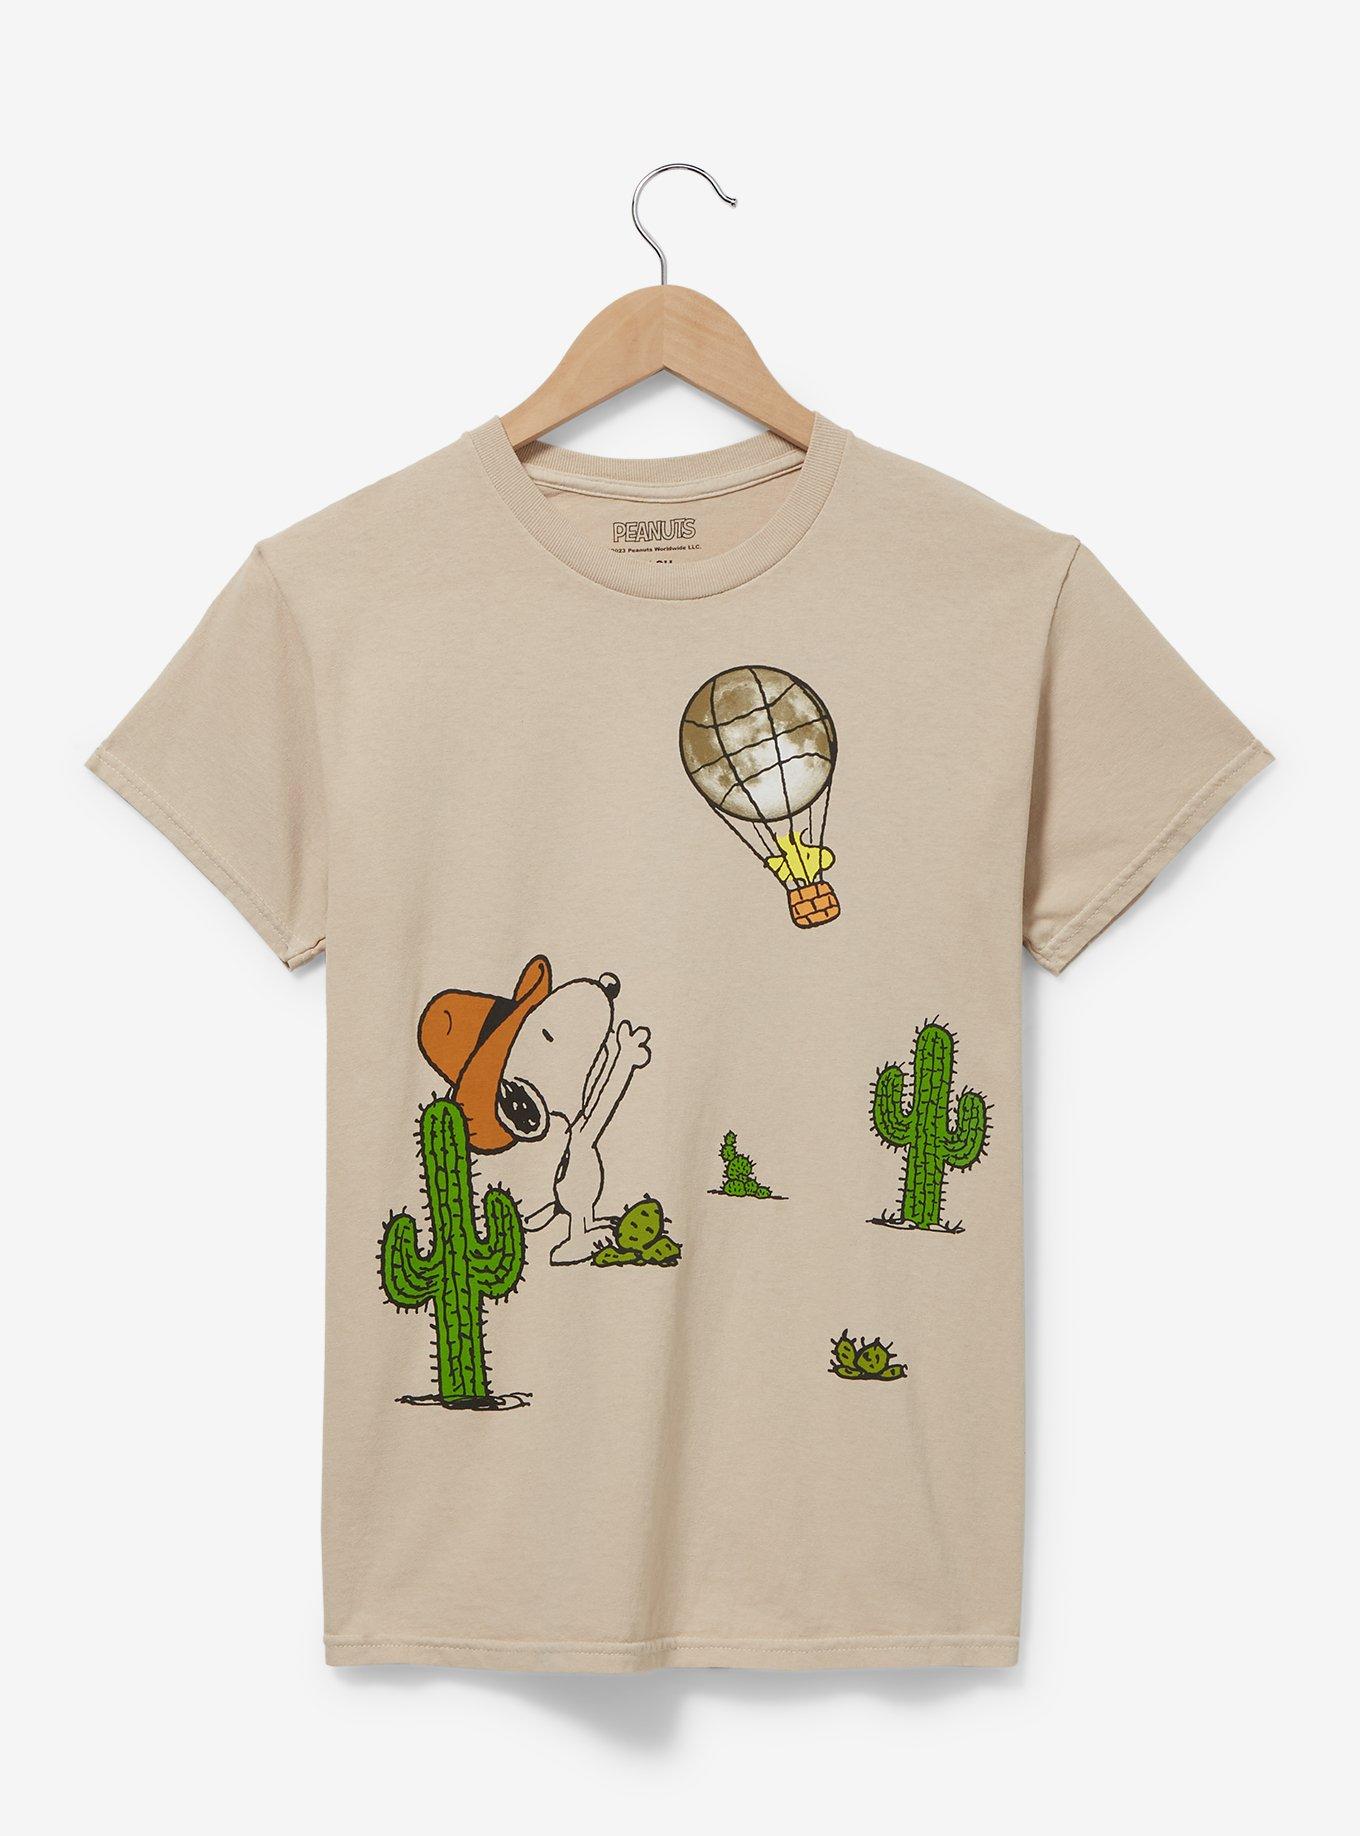 Peanuts Snoopy & Woodstock Western Portrait Women's T-Shirt - BoxLunch Exclusive, BROWN, hi-res